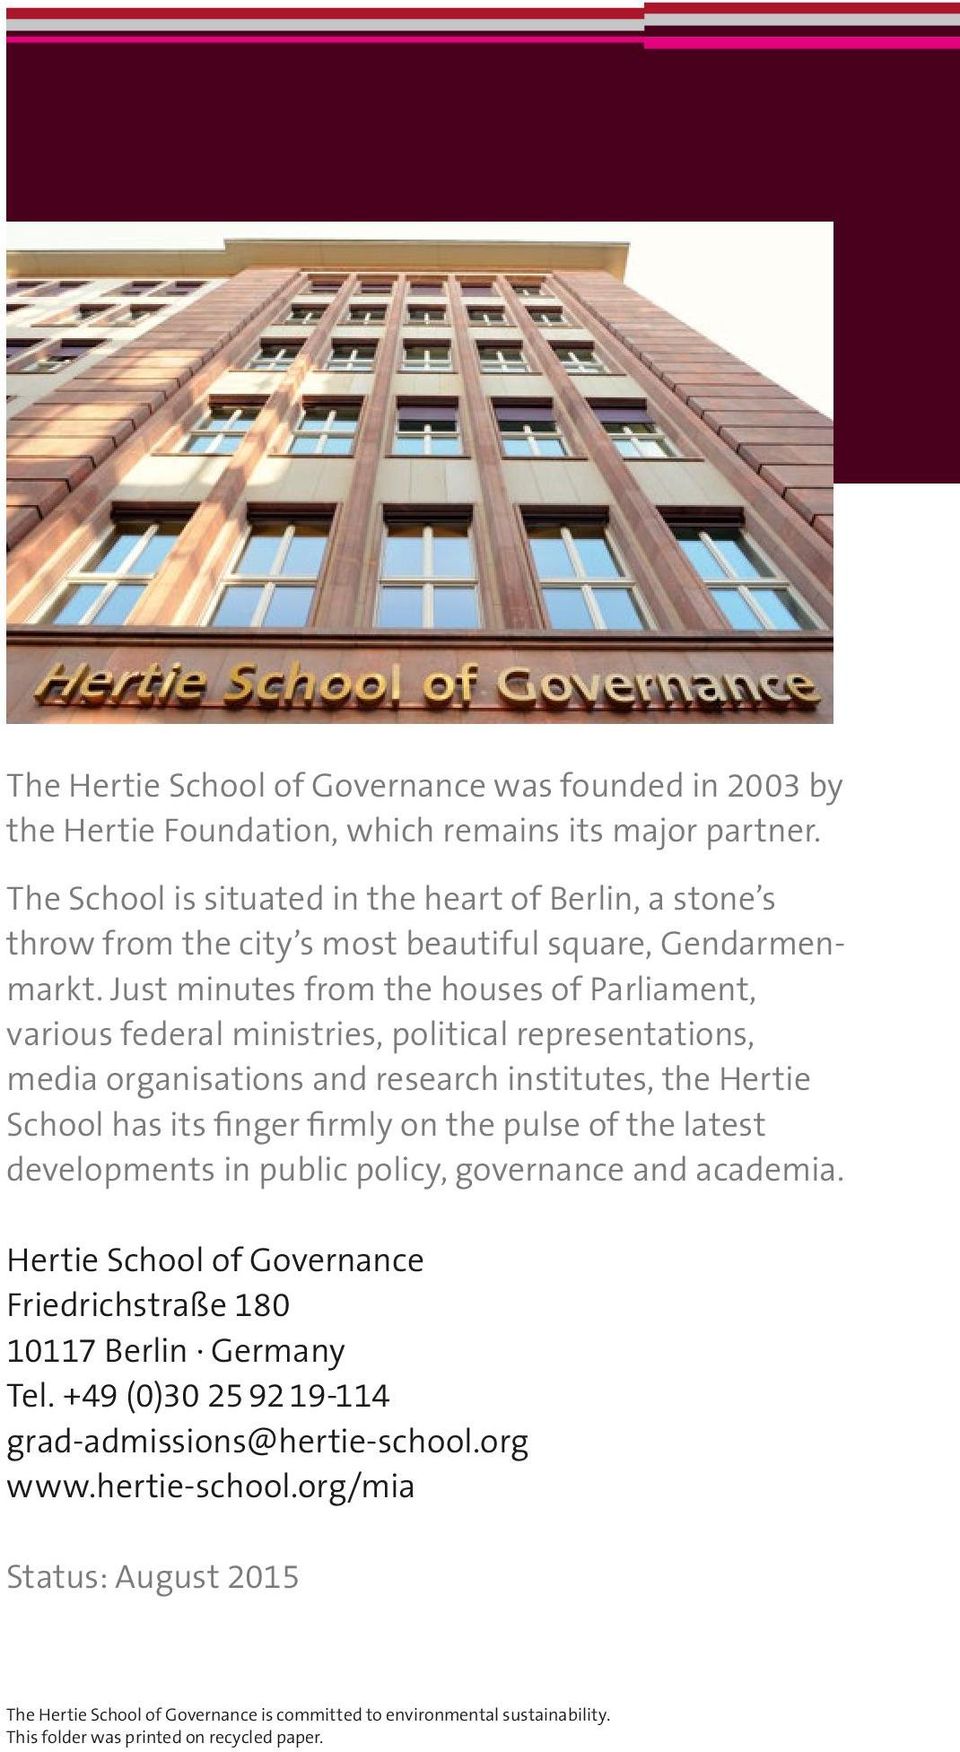 Just minutes from the houses of Parliament, various federal ministries, political represen tations, media organisations and research institutes, the Hertie School has its finger firmly on the pulse